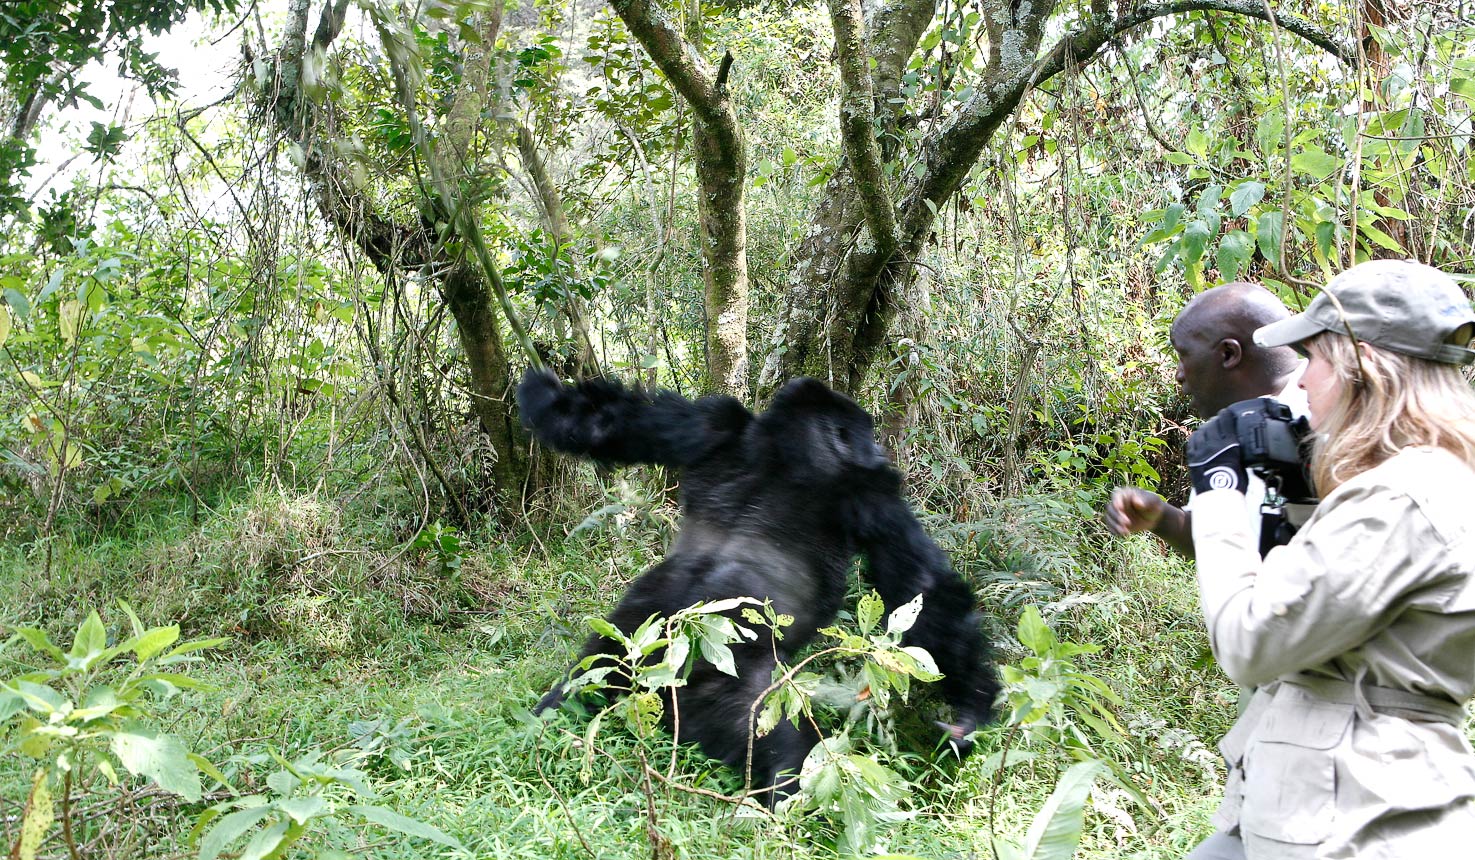 The best locations for Gorillas with Africa Travel Resource